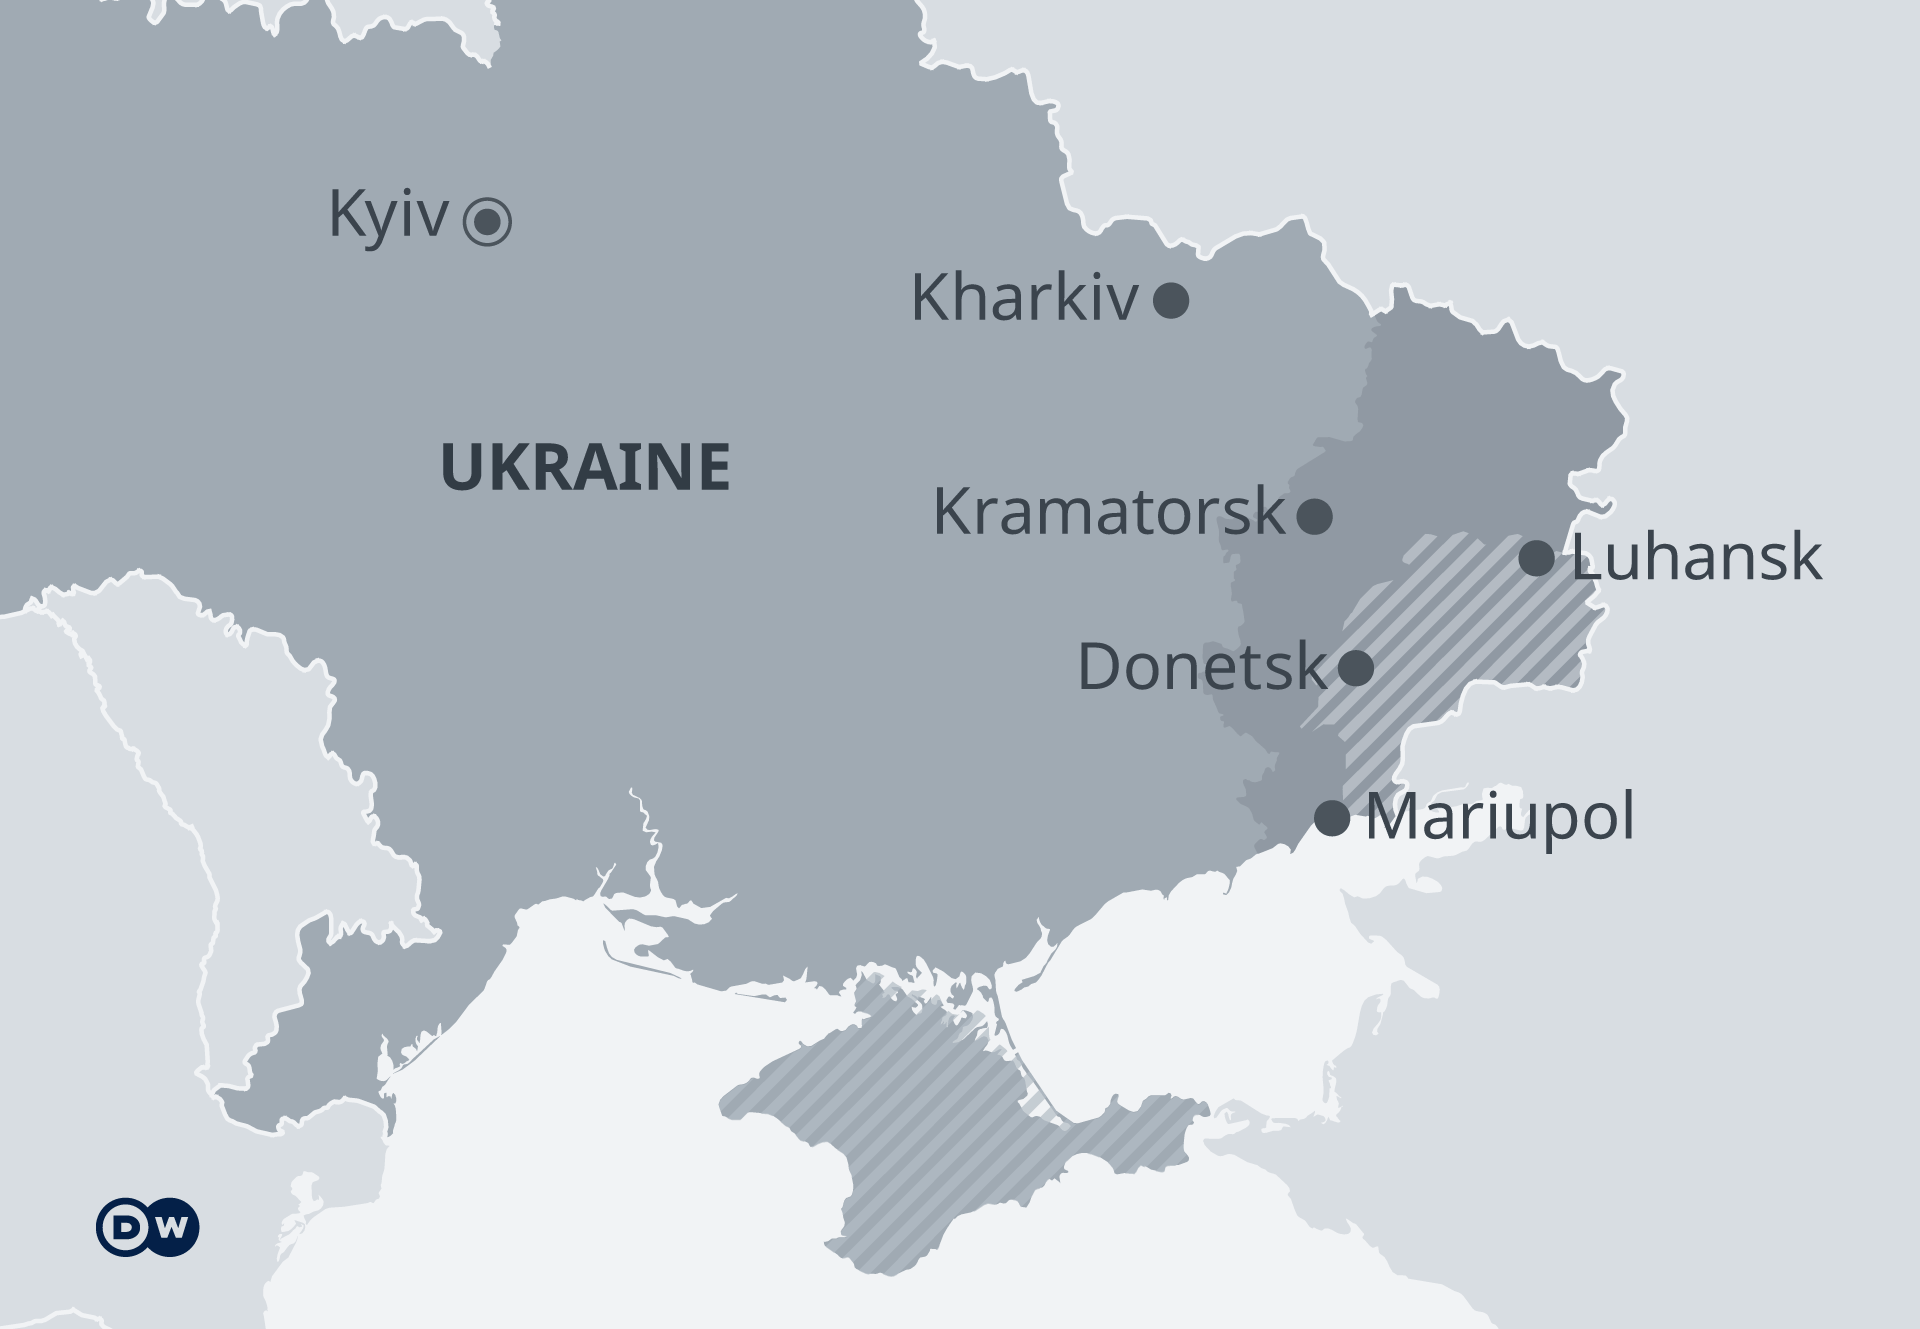 A map showing the main cities in eastern Ukraine